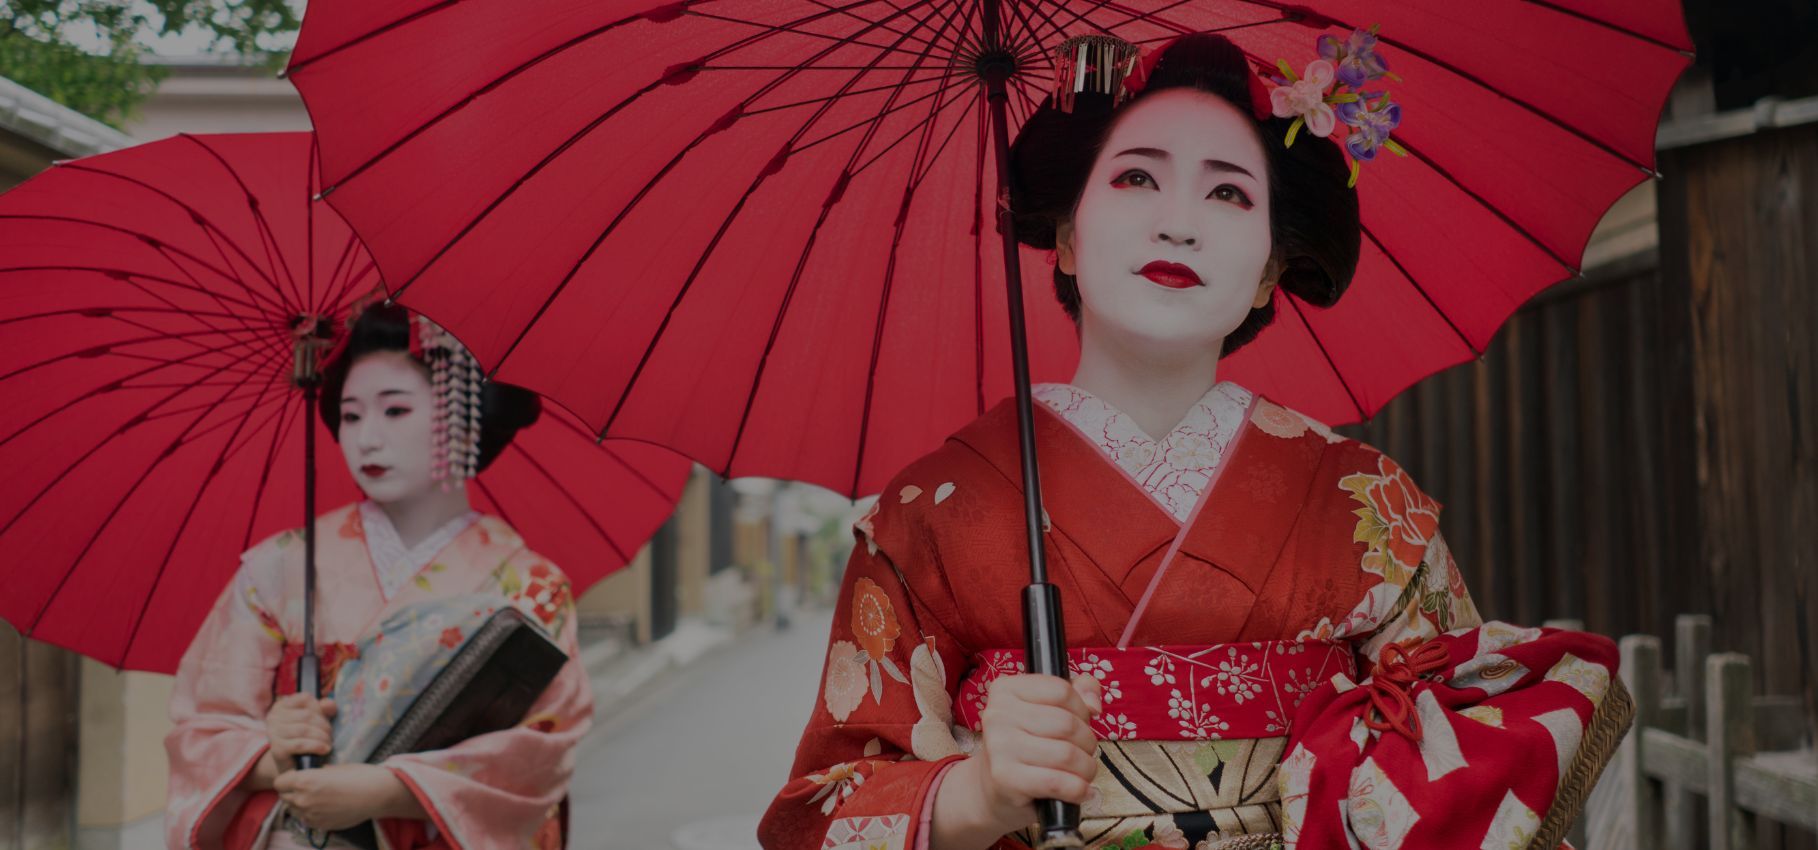 How to see a Geisha in Kyoto